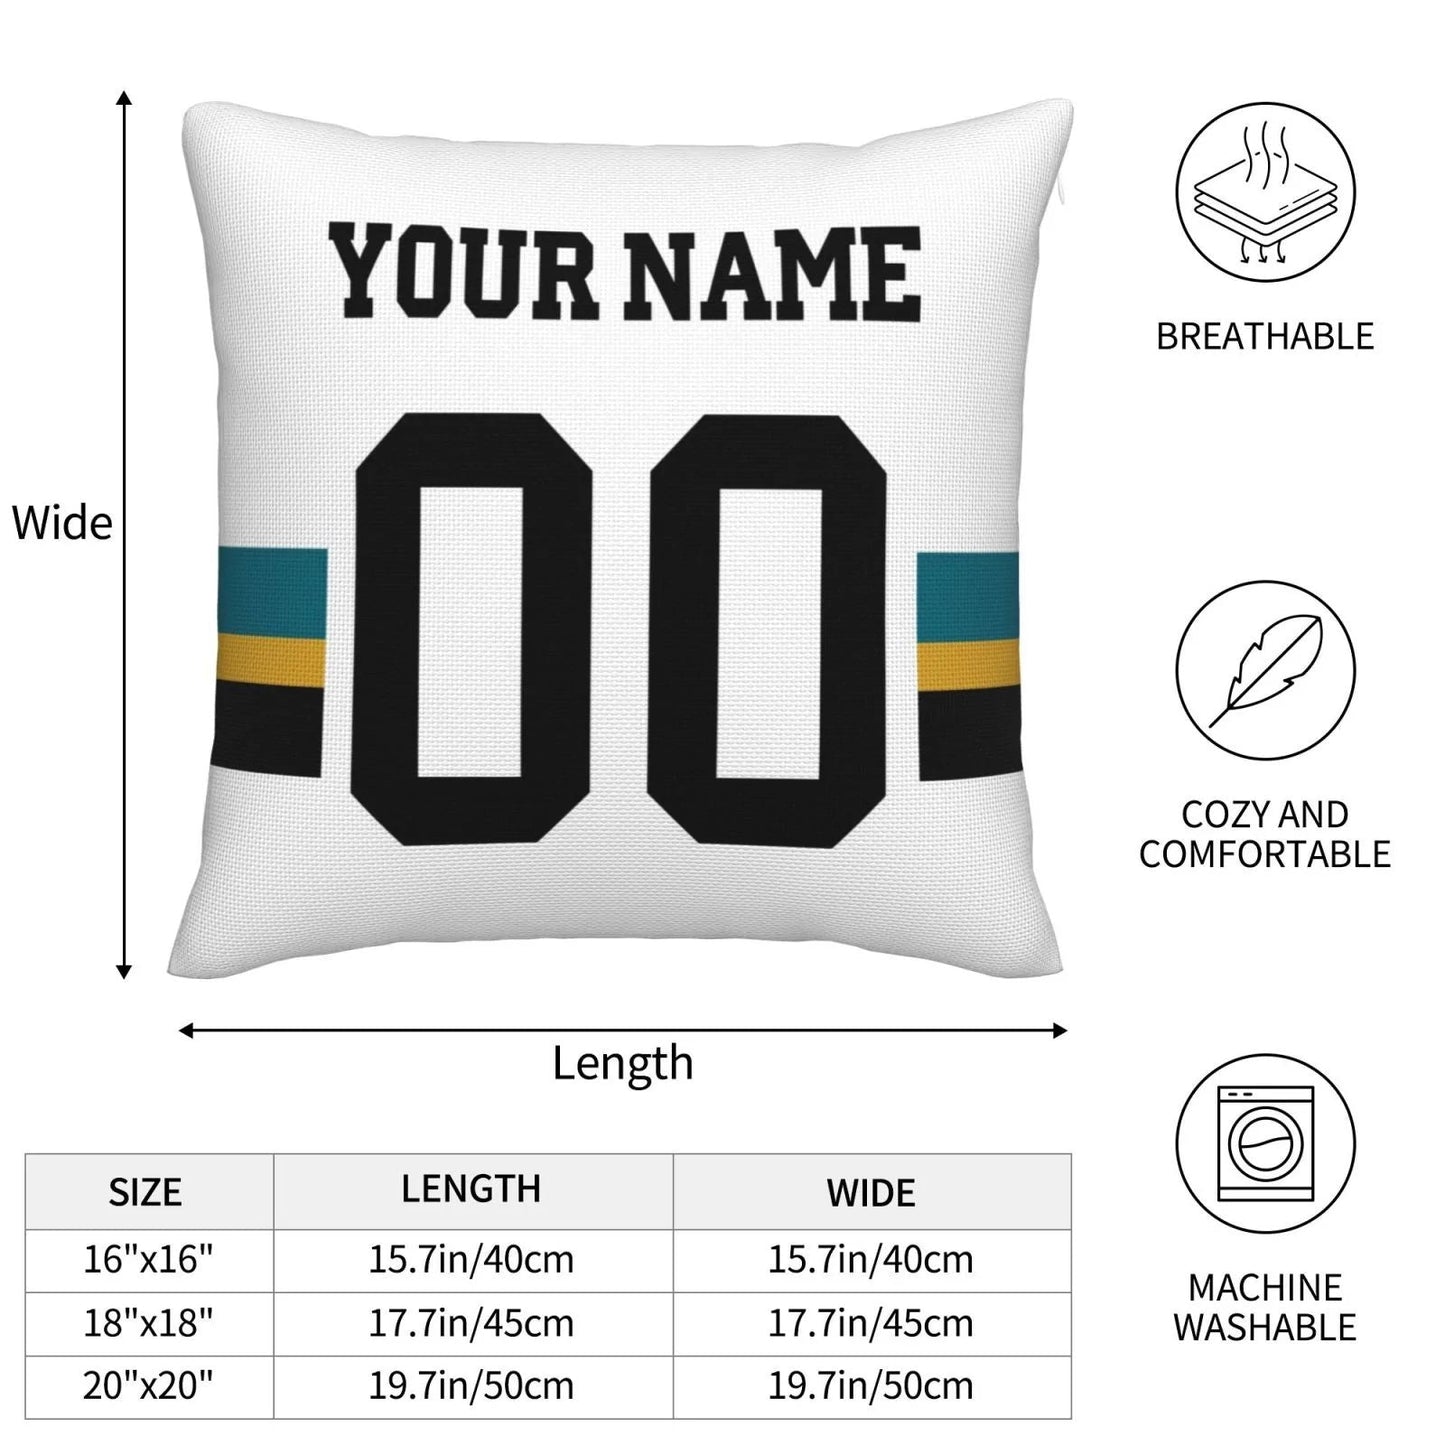 Custom J.Jaguars Pillow Decorative Throw Pillow Case - Print Personalized Football Team Fans Name & Number Birthday Gift Football Pillows